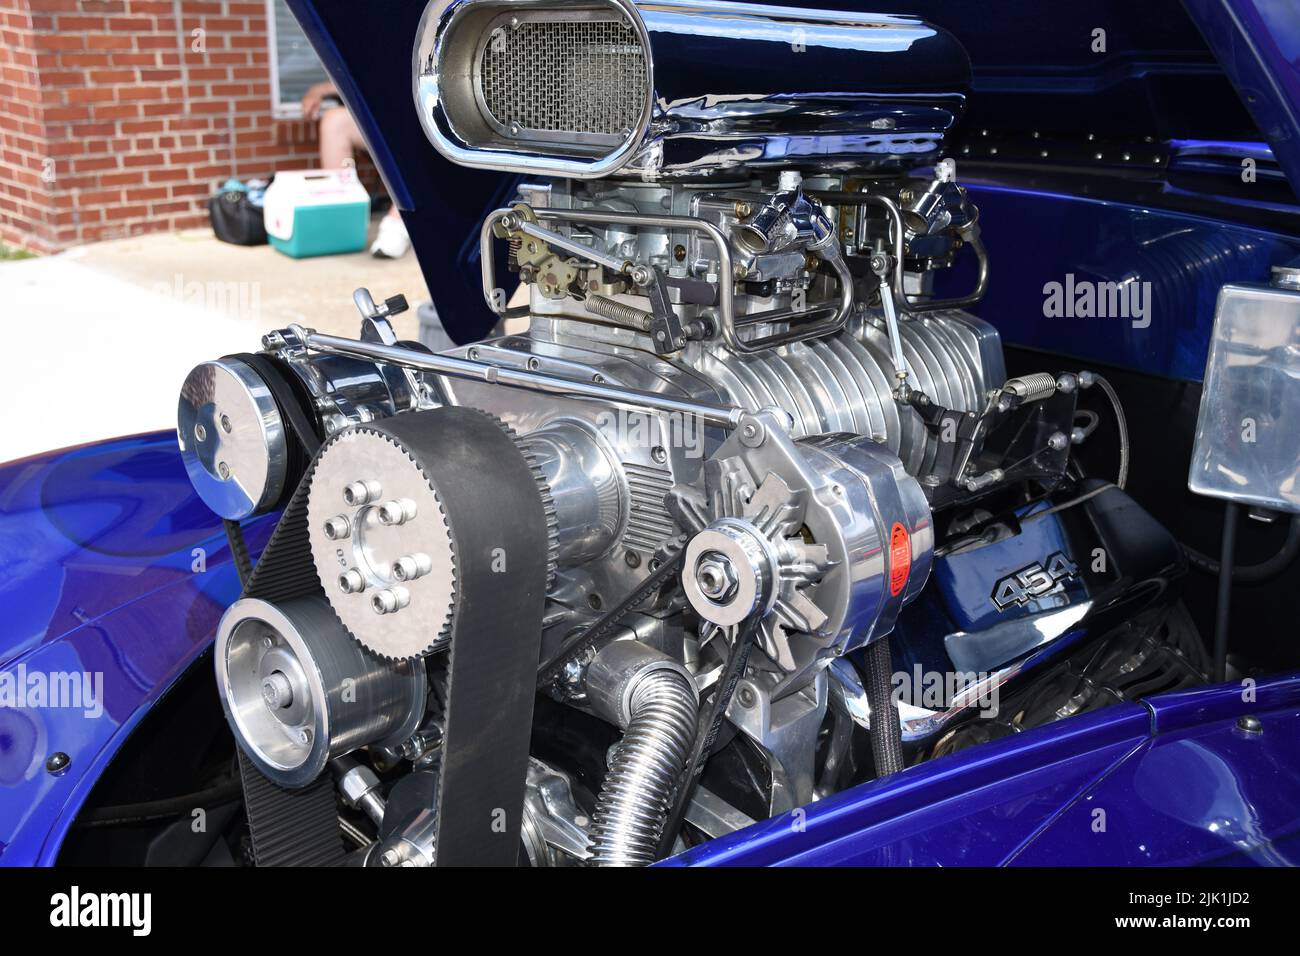 A 454 Supercharged Engine in a Willys Restomod on display at a car show. Stock Photo